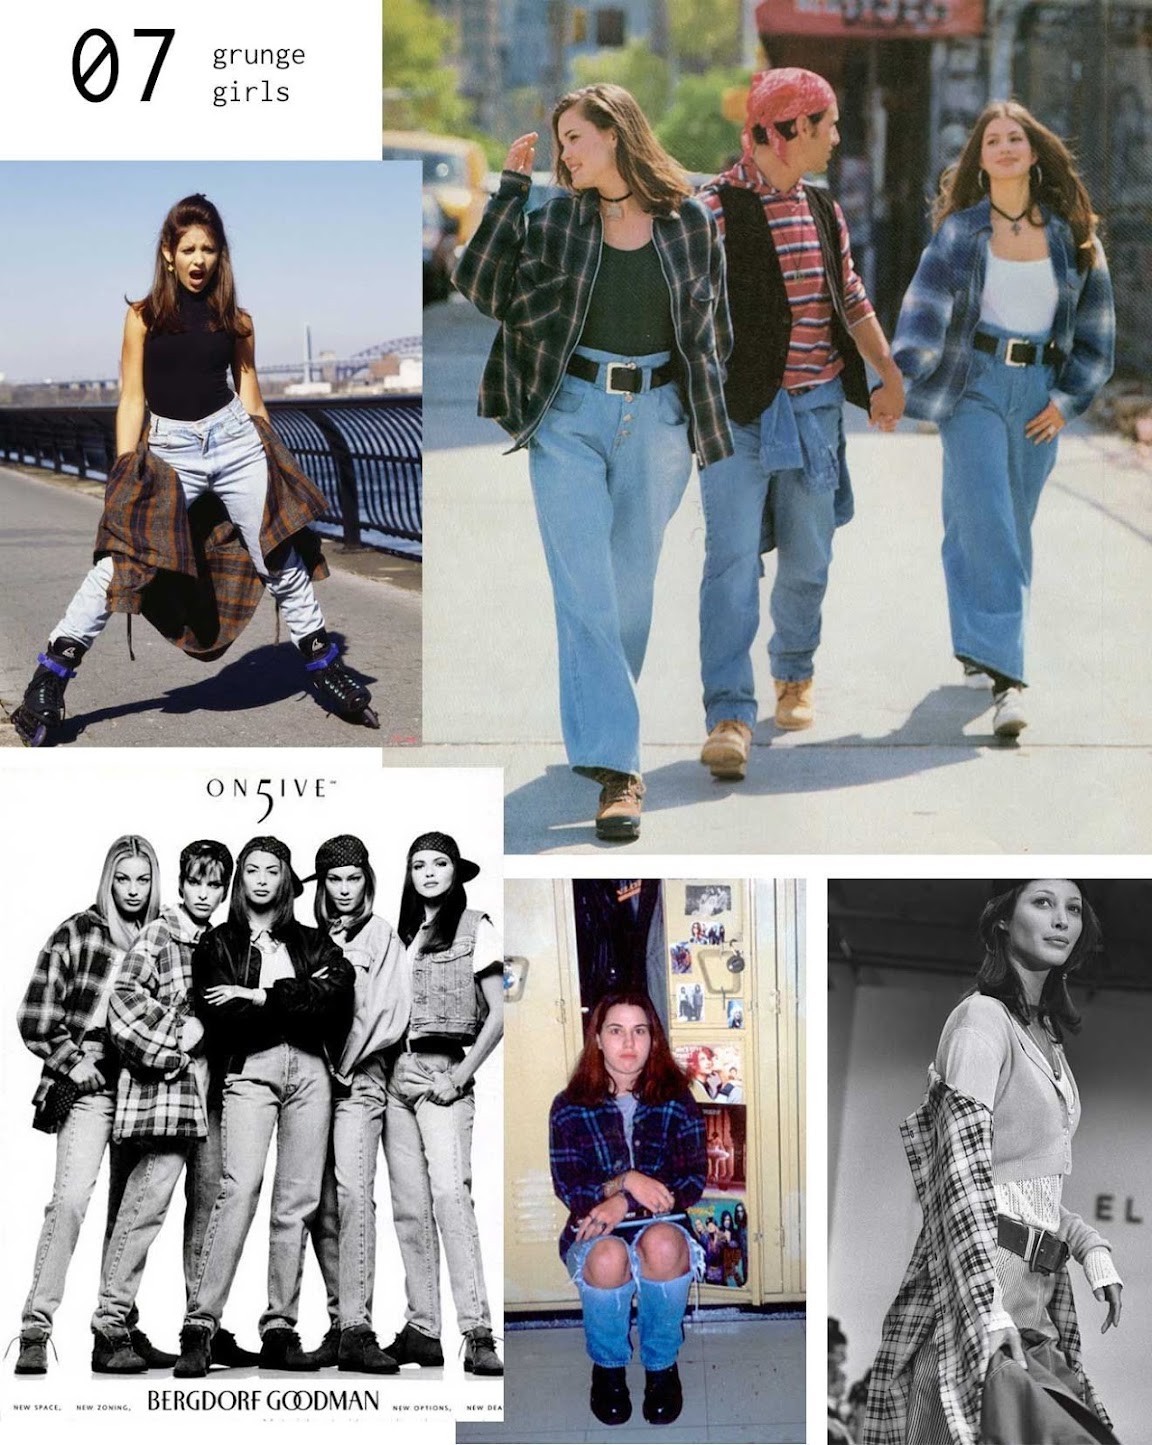 FASHION TRENDS AND ITS IMPACT ON SOCIETY